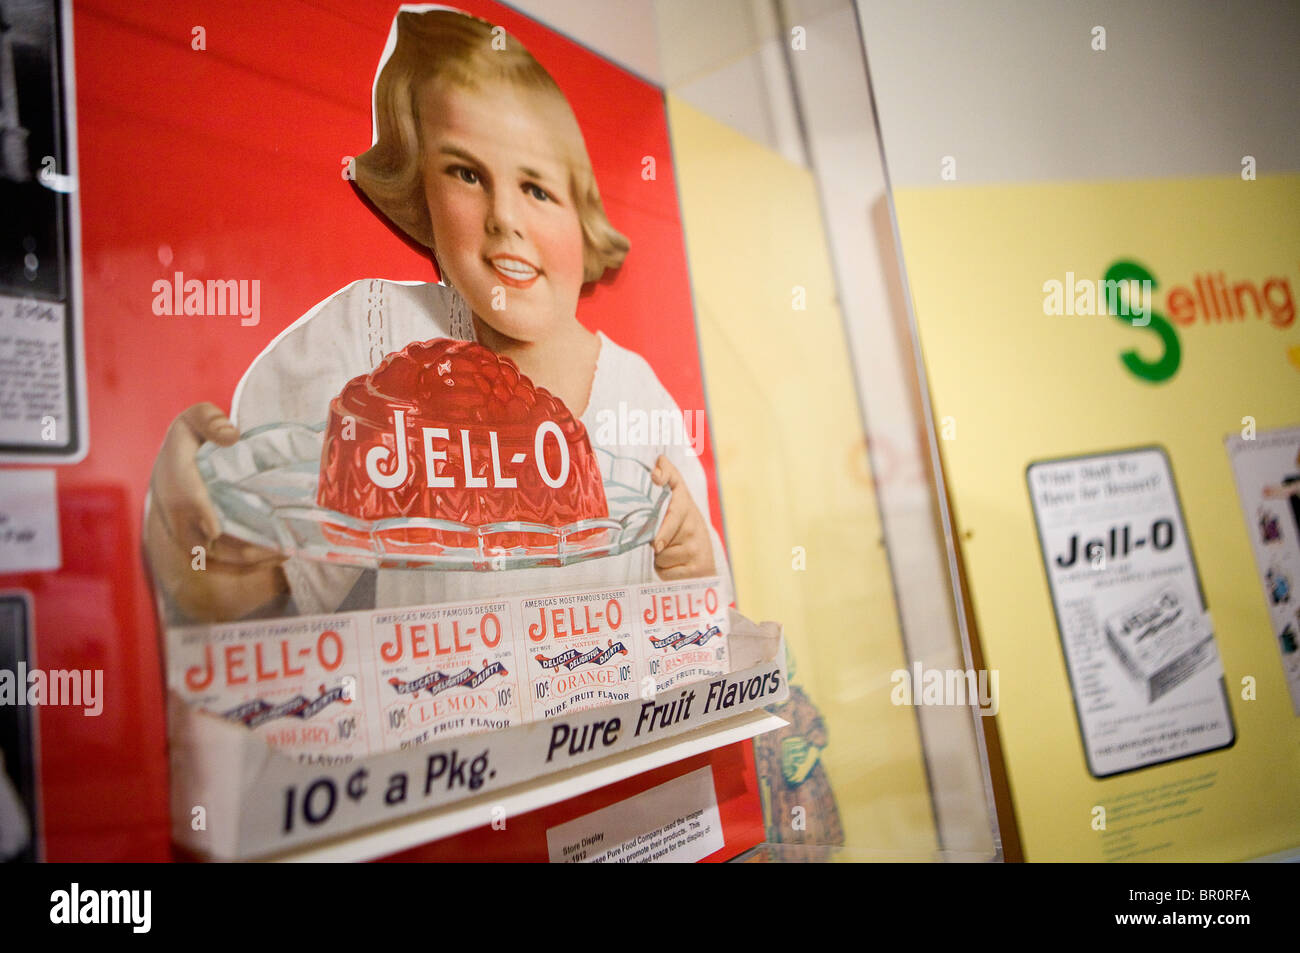 The Jell-O Museum in LeRoy, New York.  Stock Photo